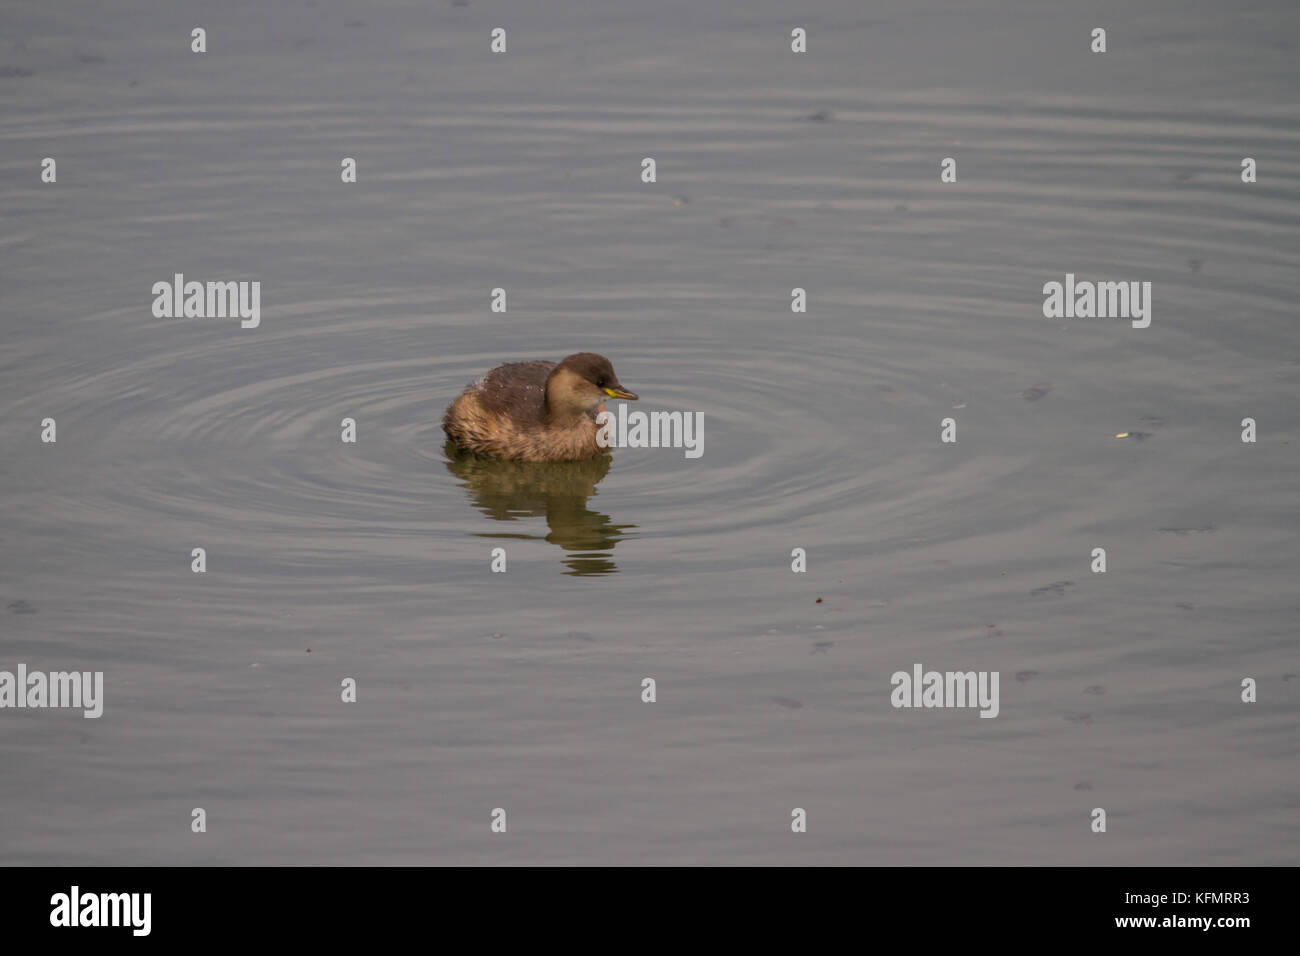 A Little Grebe (Tachybaptus ruficollis), also known as a Dabchick preparing to dive for food. Stock Photo